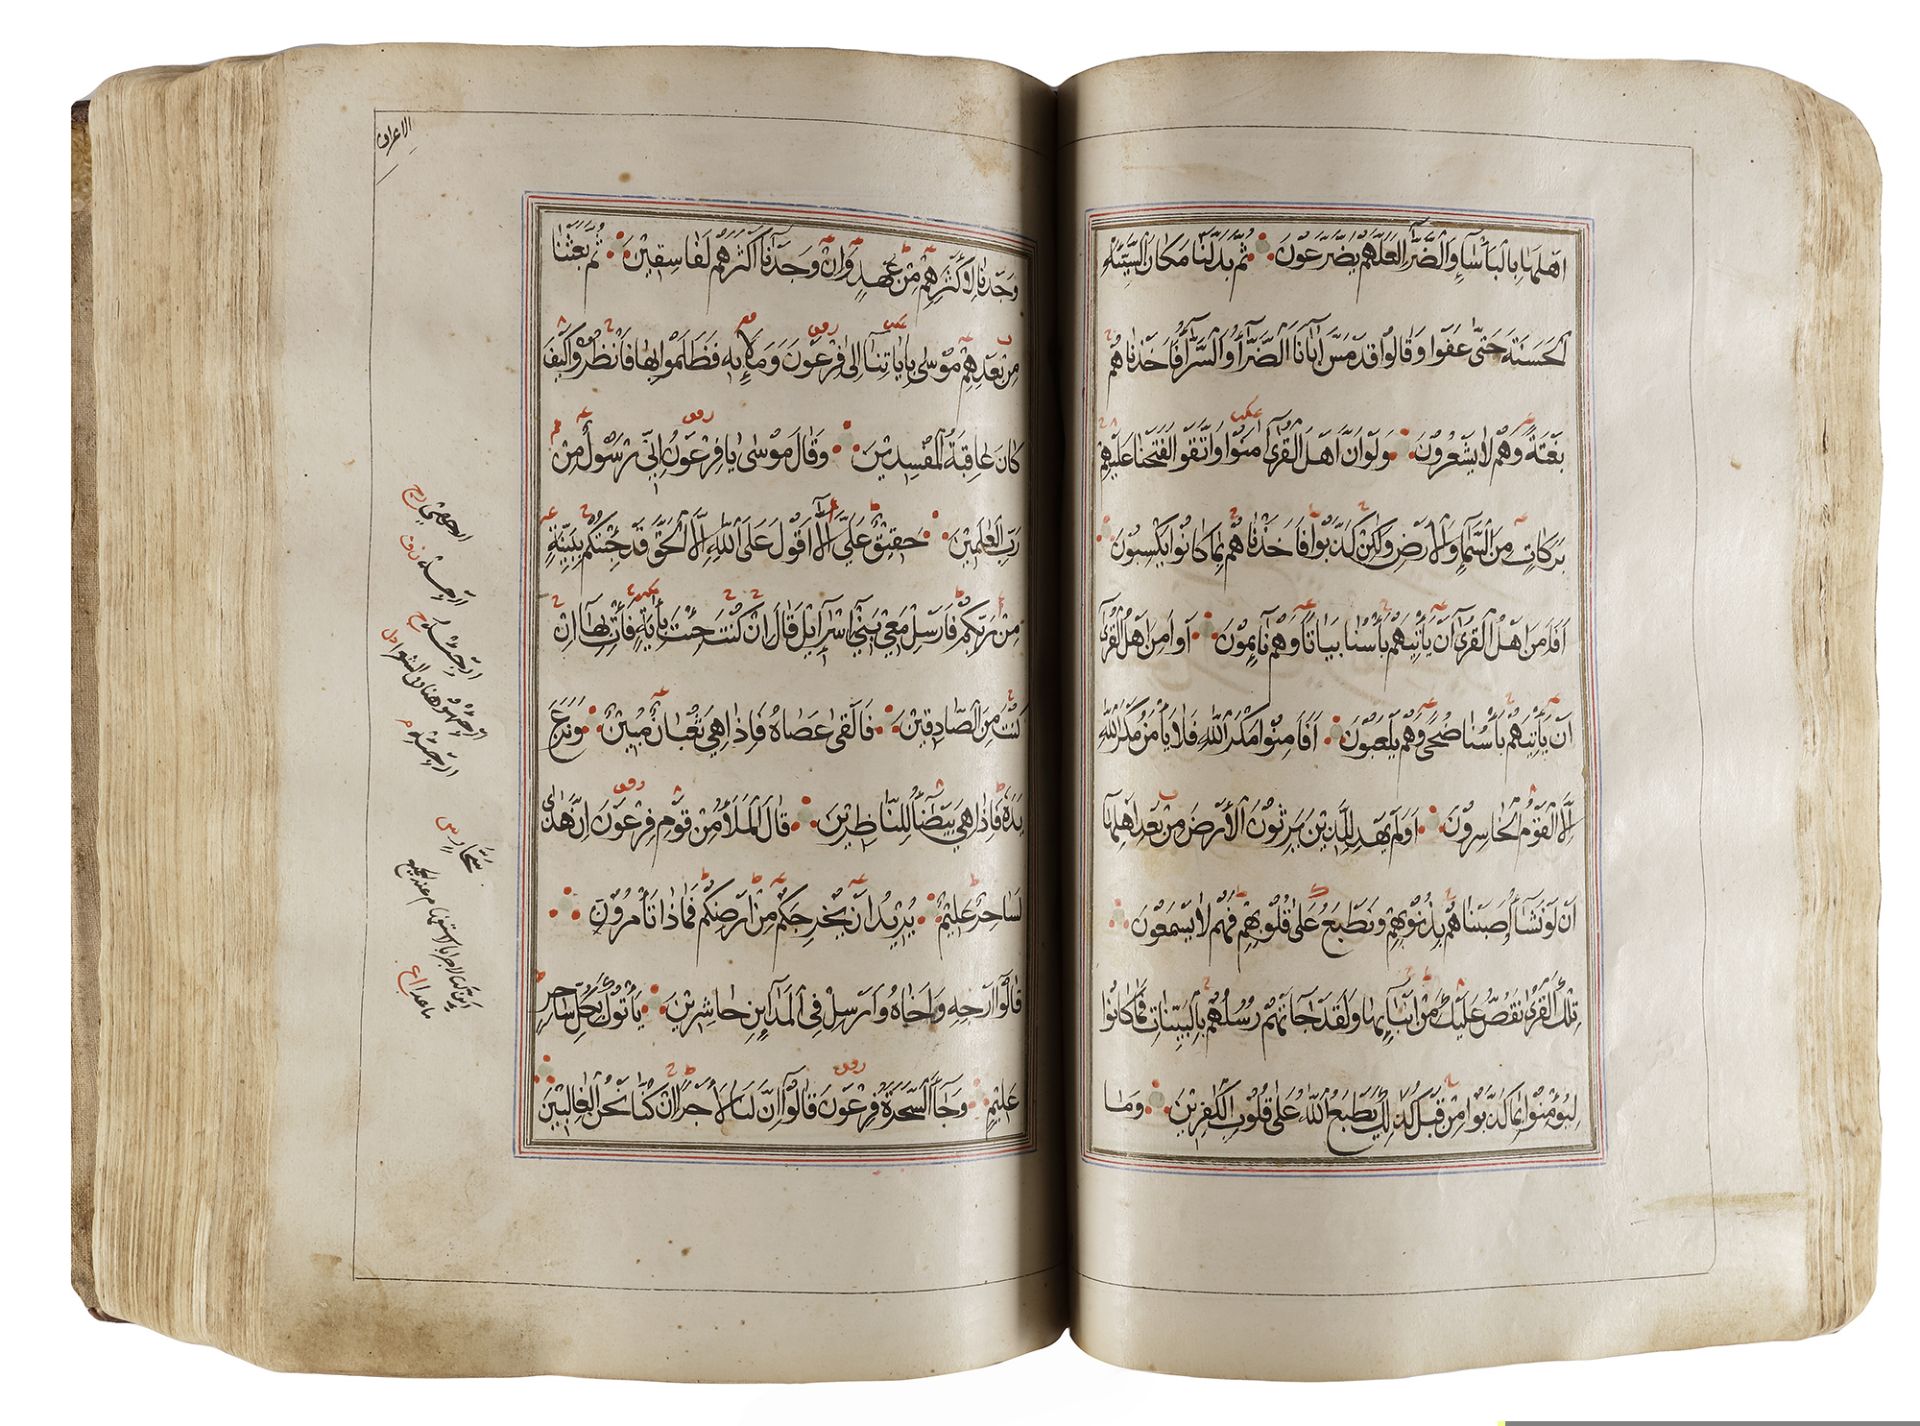 AN ILLUMINATED QURAN, YEMEN, BY AHMED QASEM IBN ISMAIL IN 1035 AH/1626 AD - Image 8 of 18